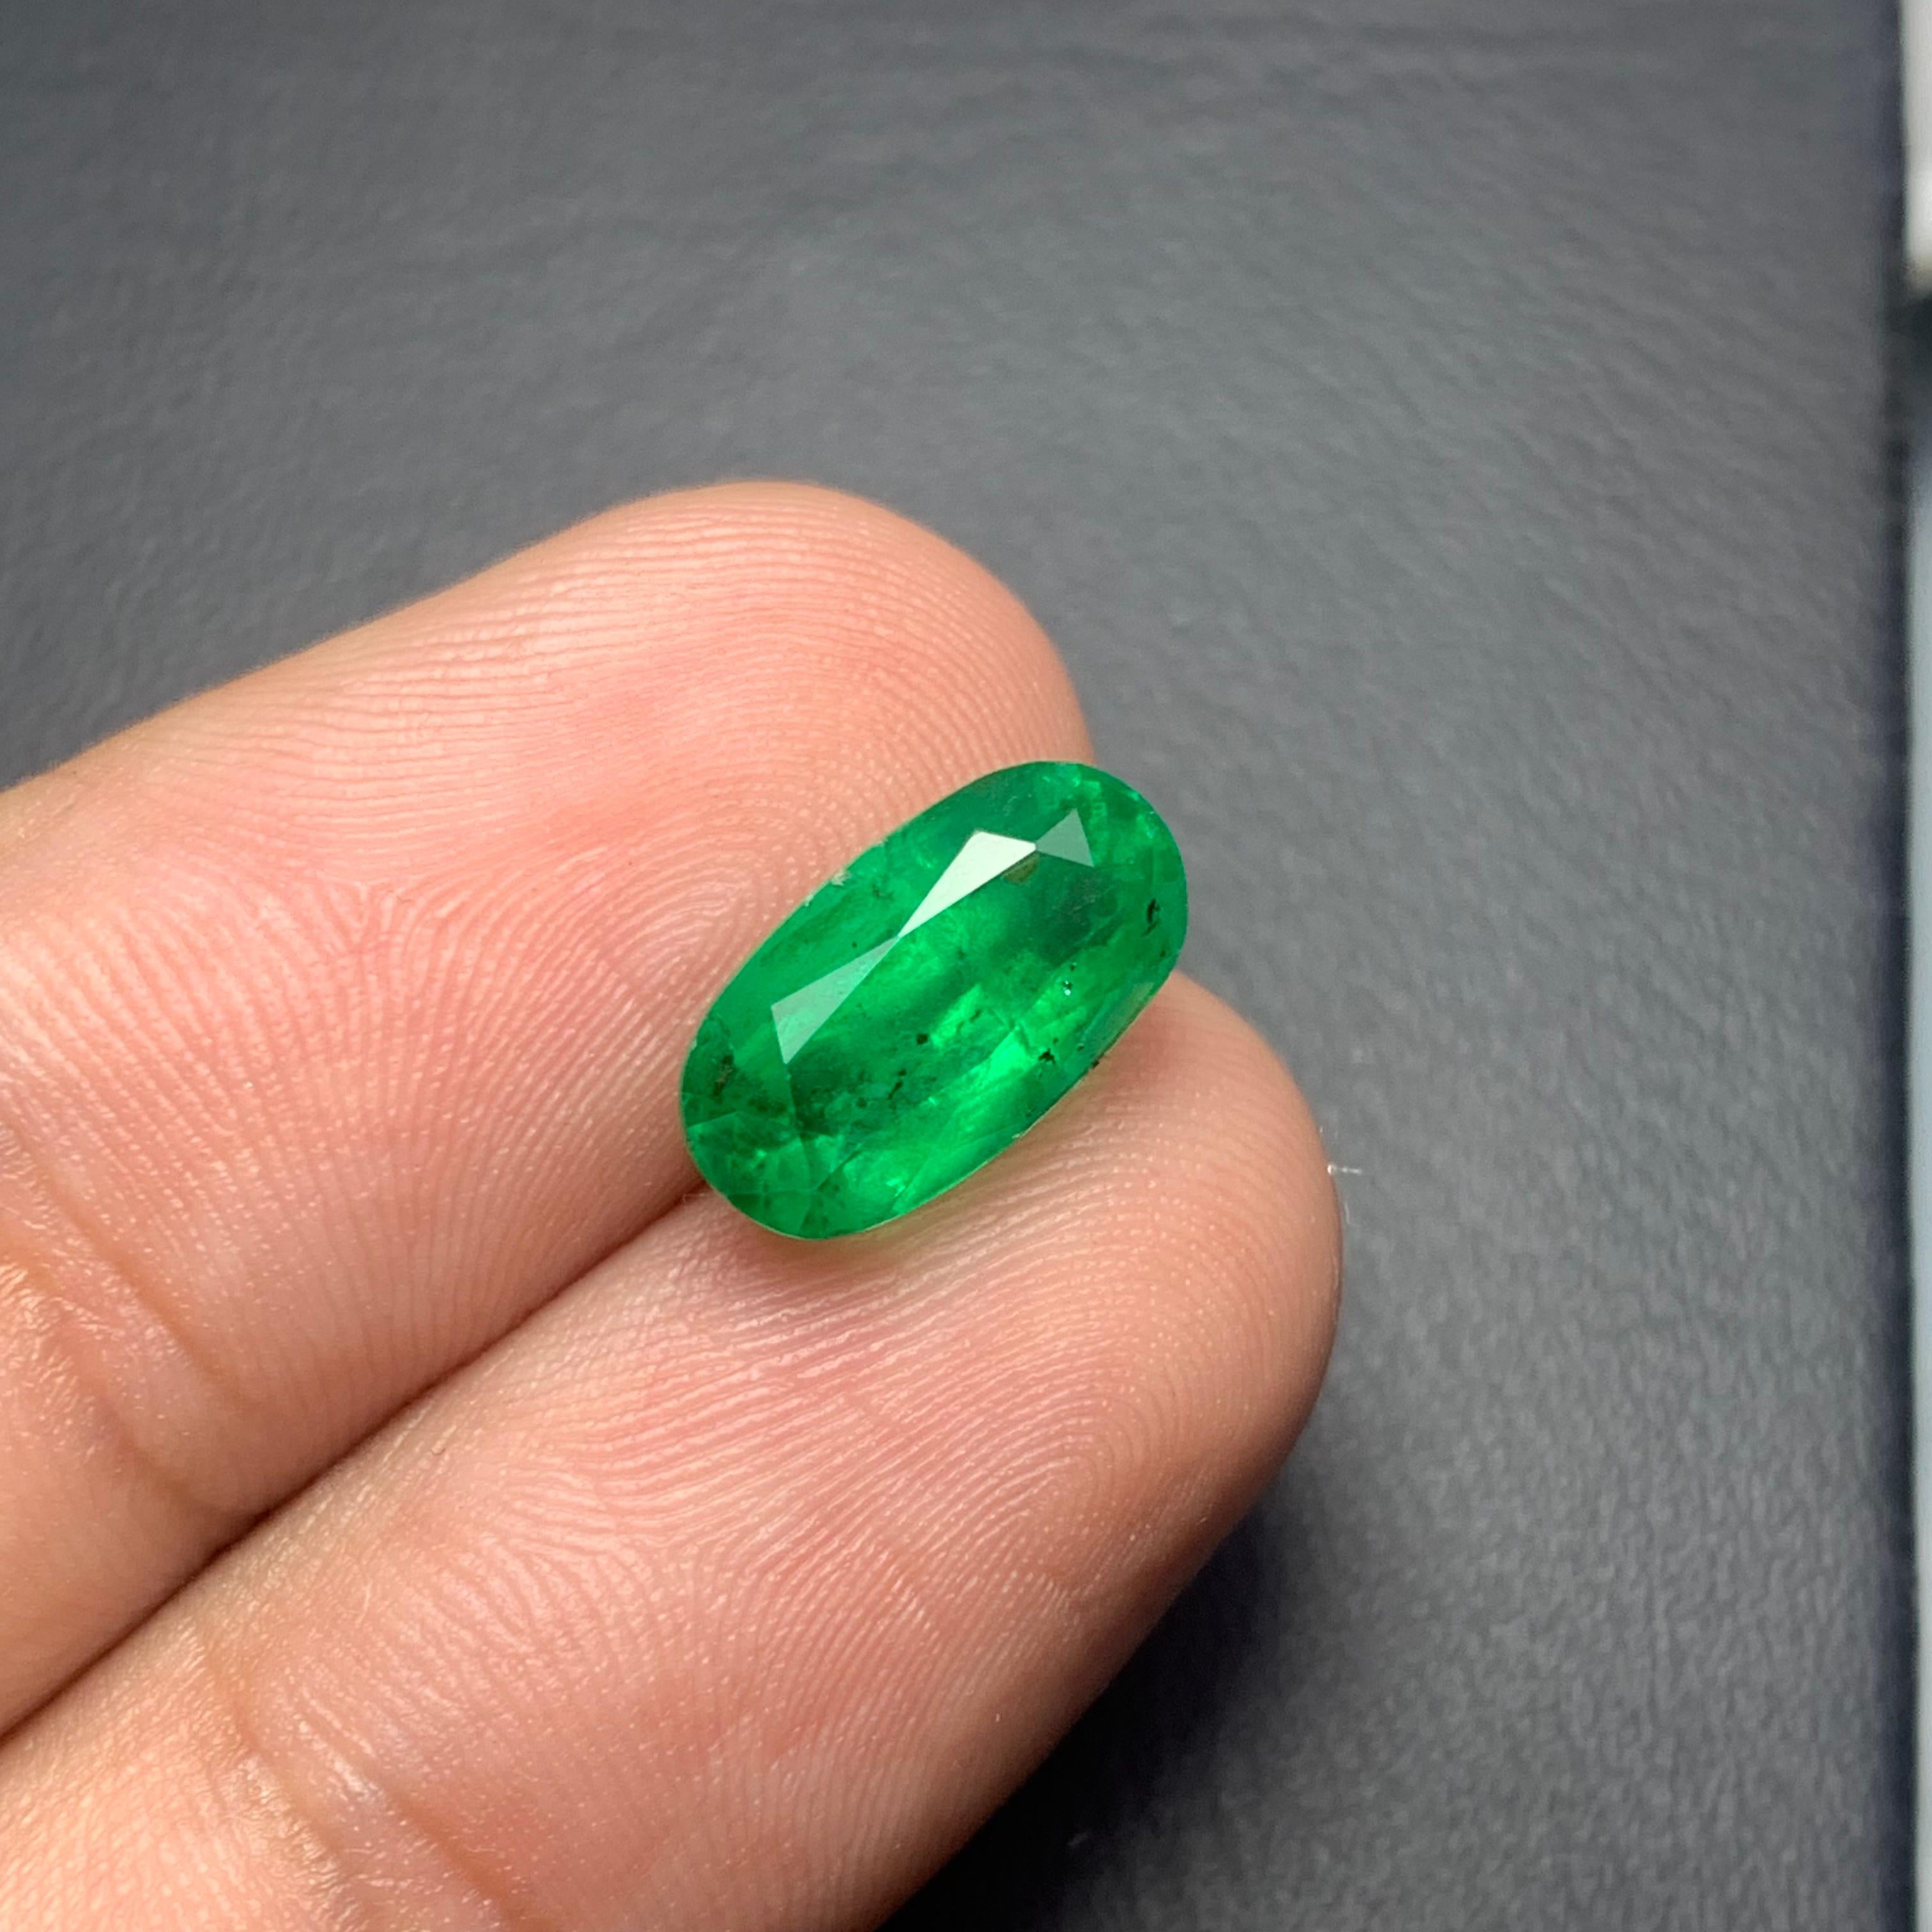 Loose Emerald
Weight: 3.10 Carats
Dimension: 12.3x6.7x5.5 m
Origin: Swat Pakistan Mine
Shape: Oval
Color: Vivid Green
Treatment: Non
Certificate: On Demand 
.
Wearing an emerald gives strength to the planet Mercury located in the person's horoscope.